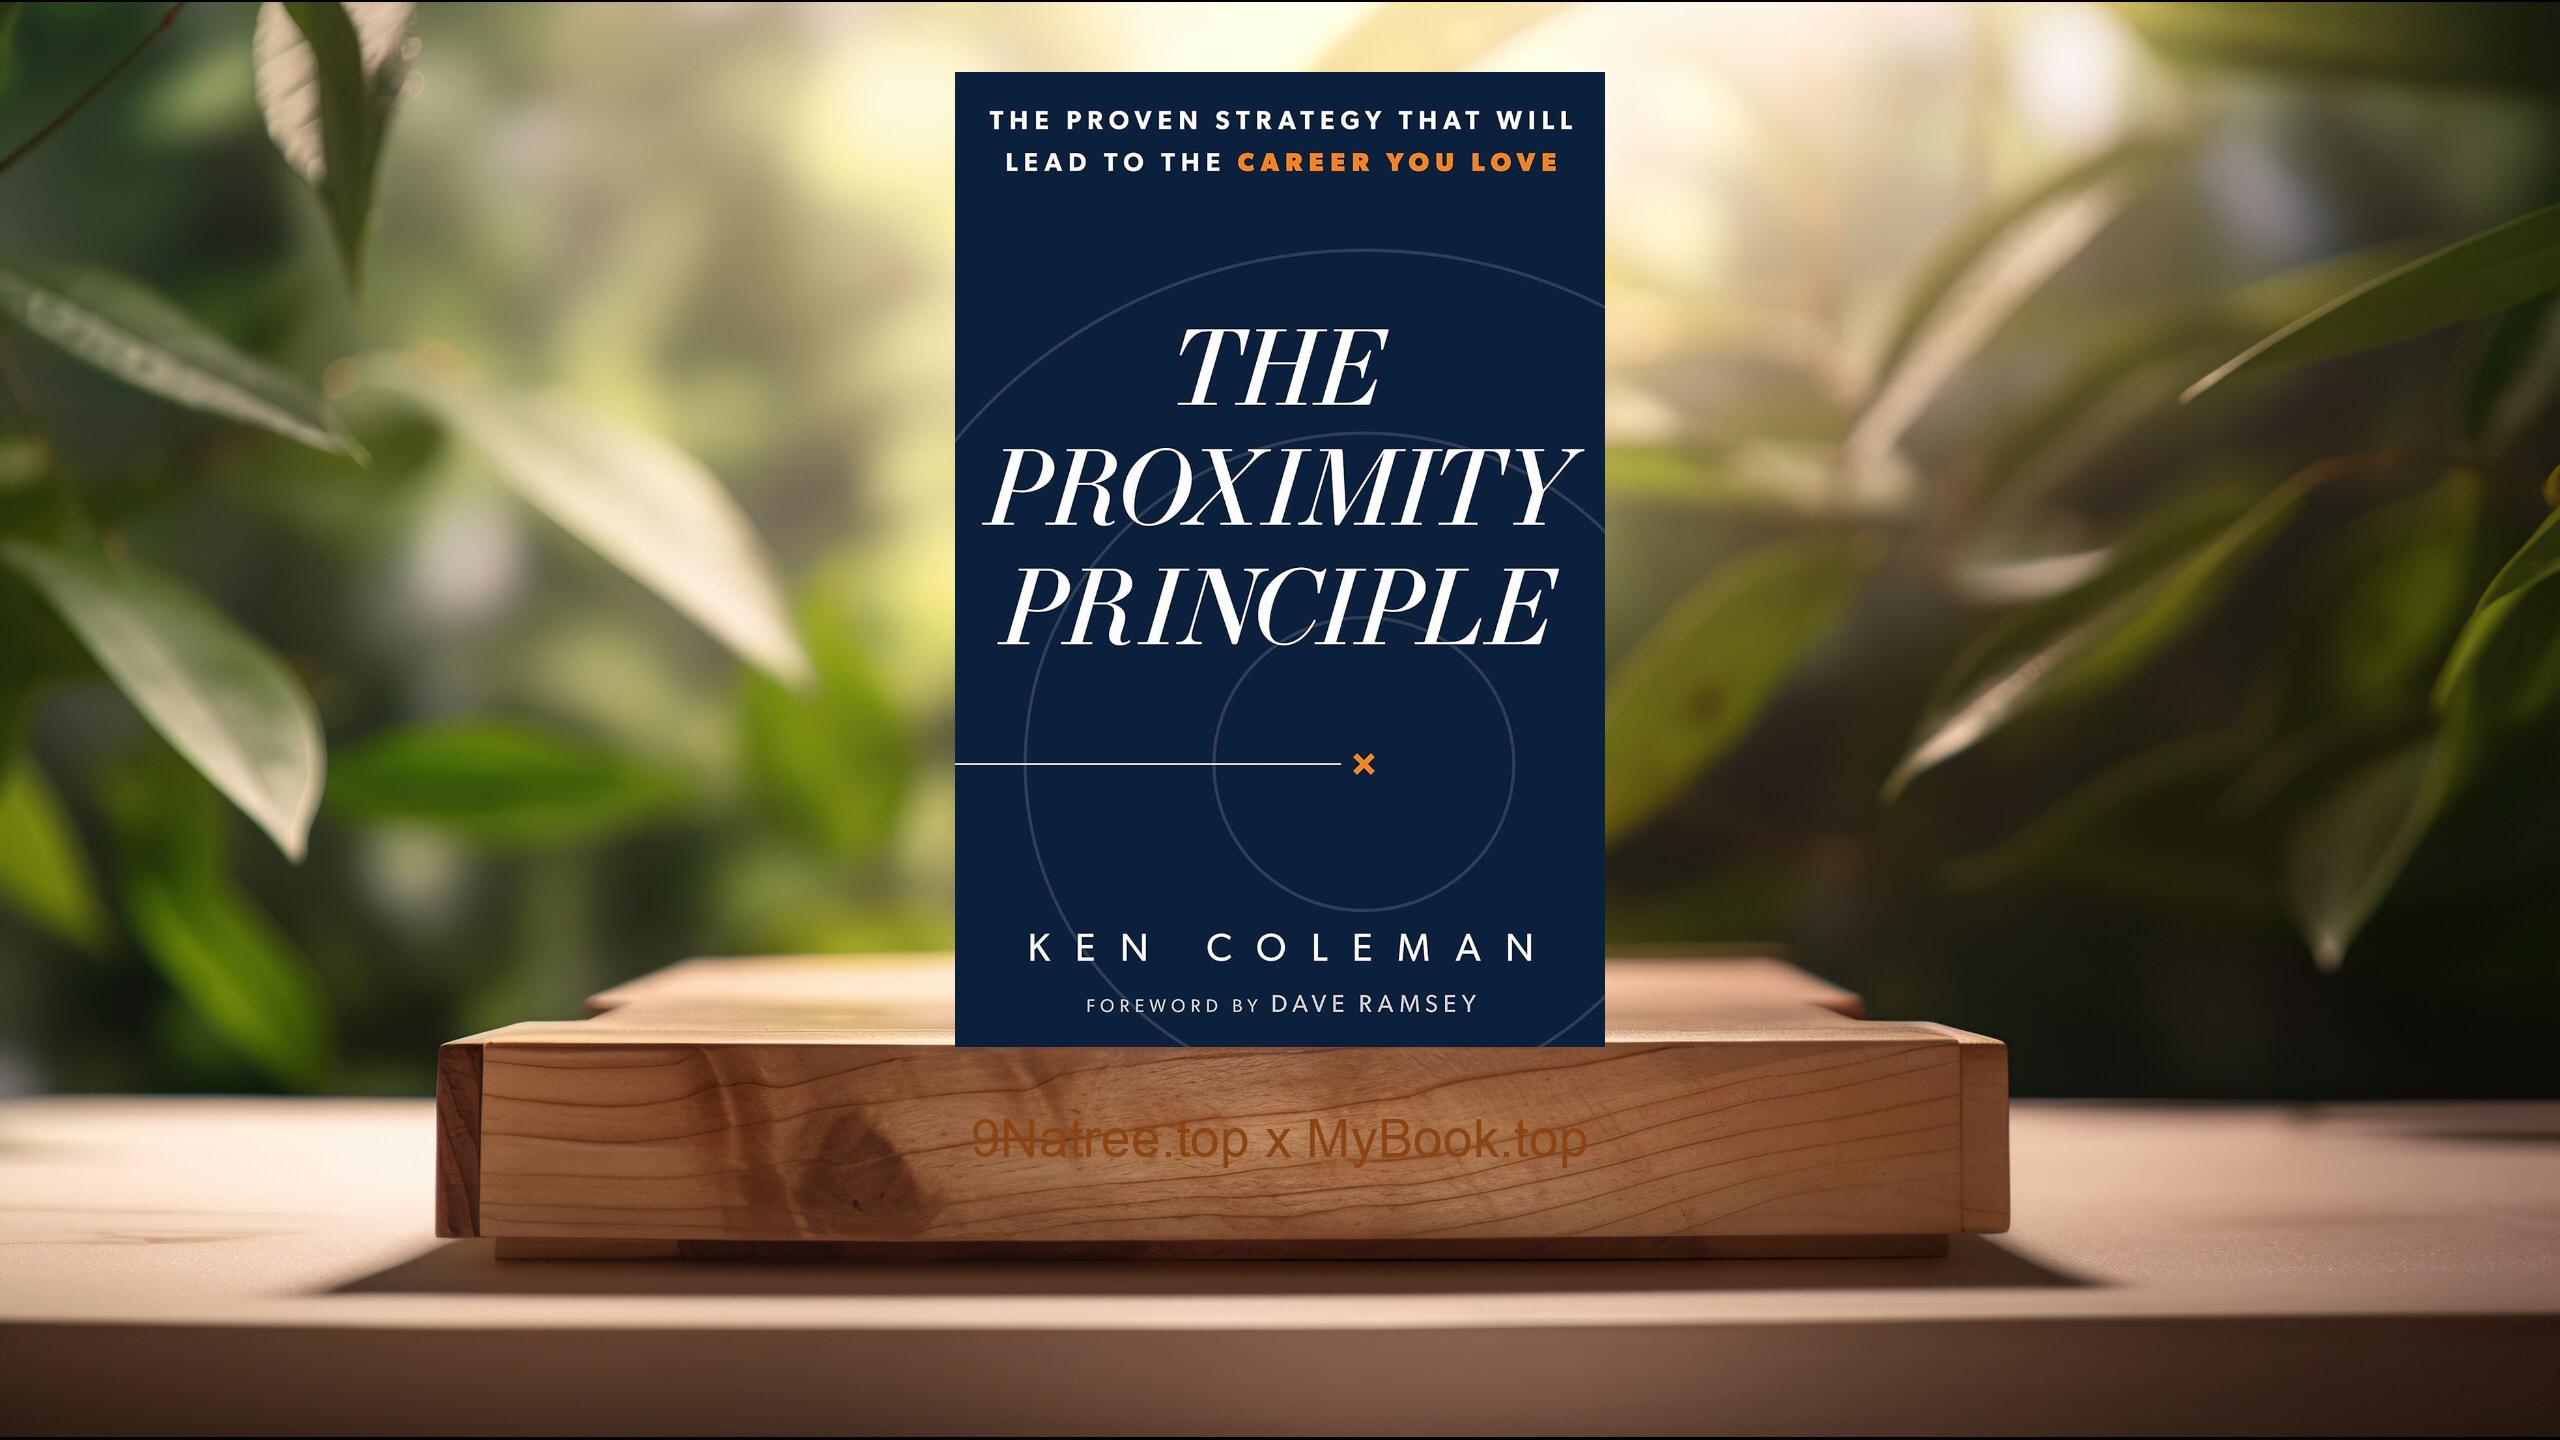 [Review] The Proximity Principle: The Proven Strategy That Will Lead to a Career You Love (Ken Coleman) Summarized